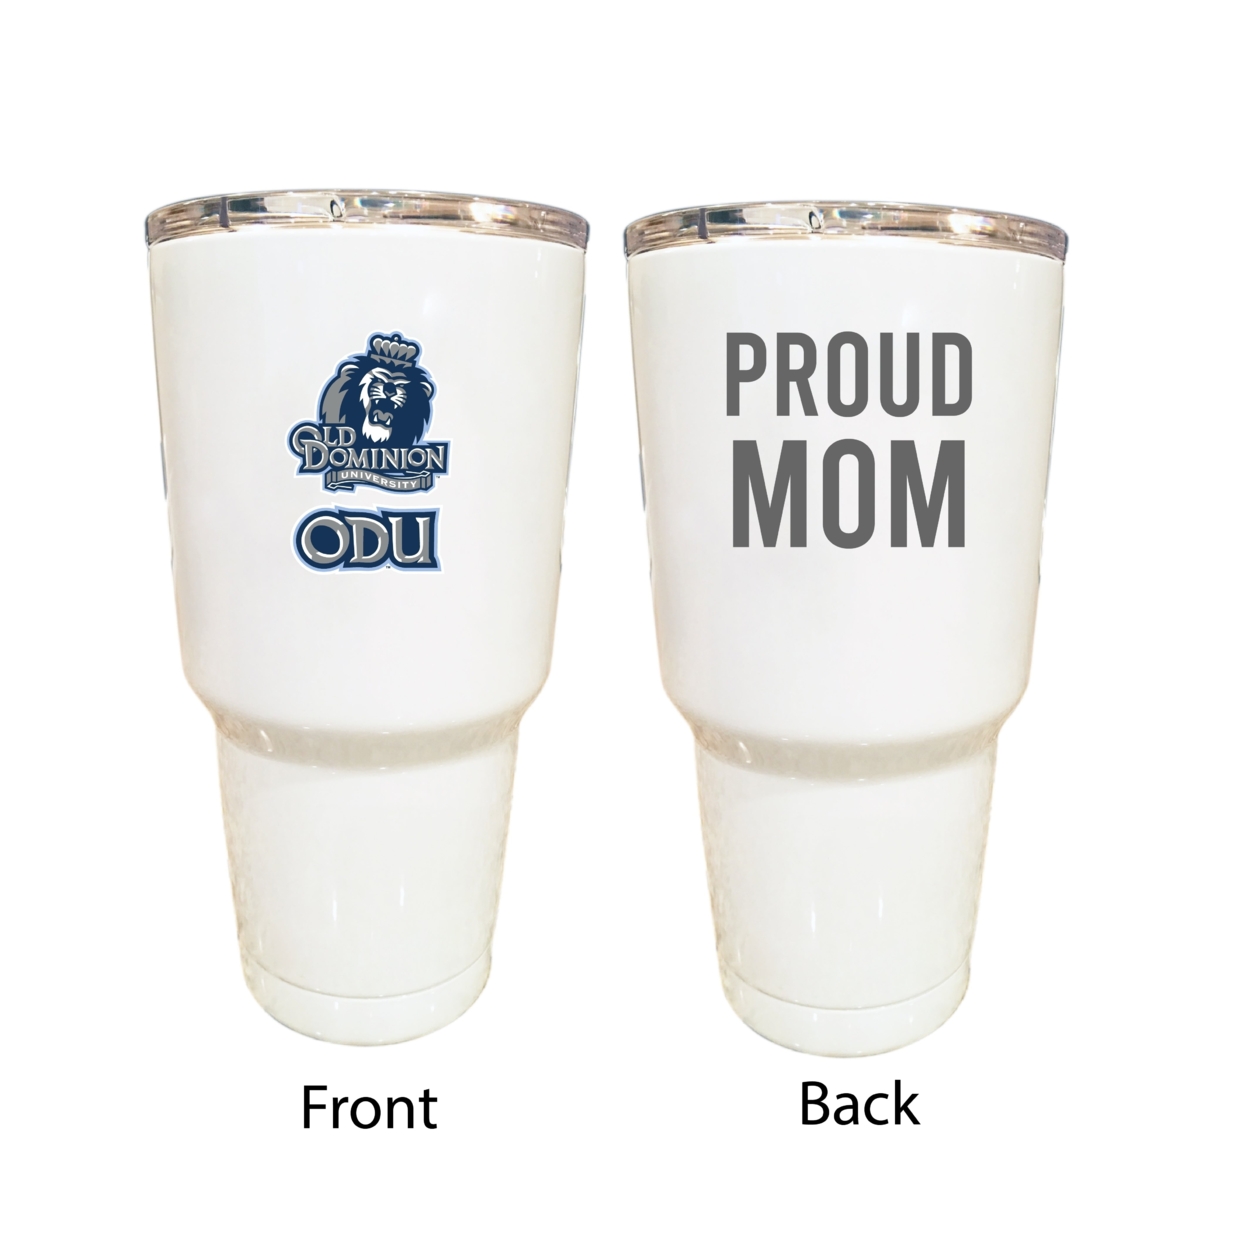 Old Dominion Monarchs Proud Mom 24 Oz Insulated Stainless Steel Tumblers Choose Your Color.